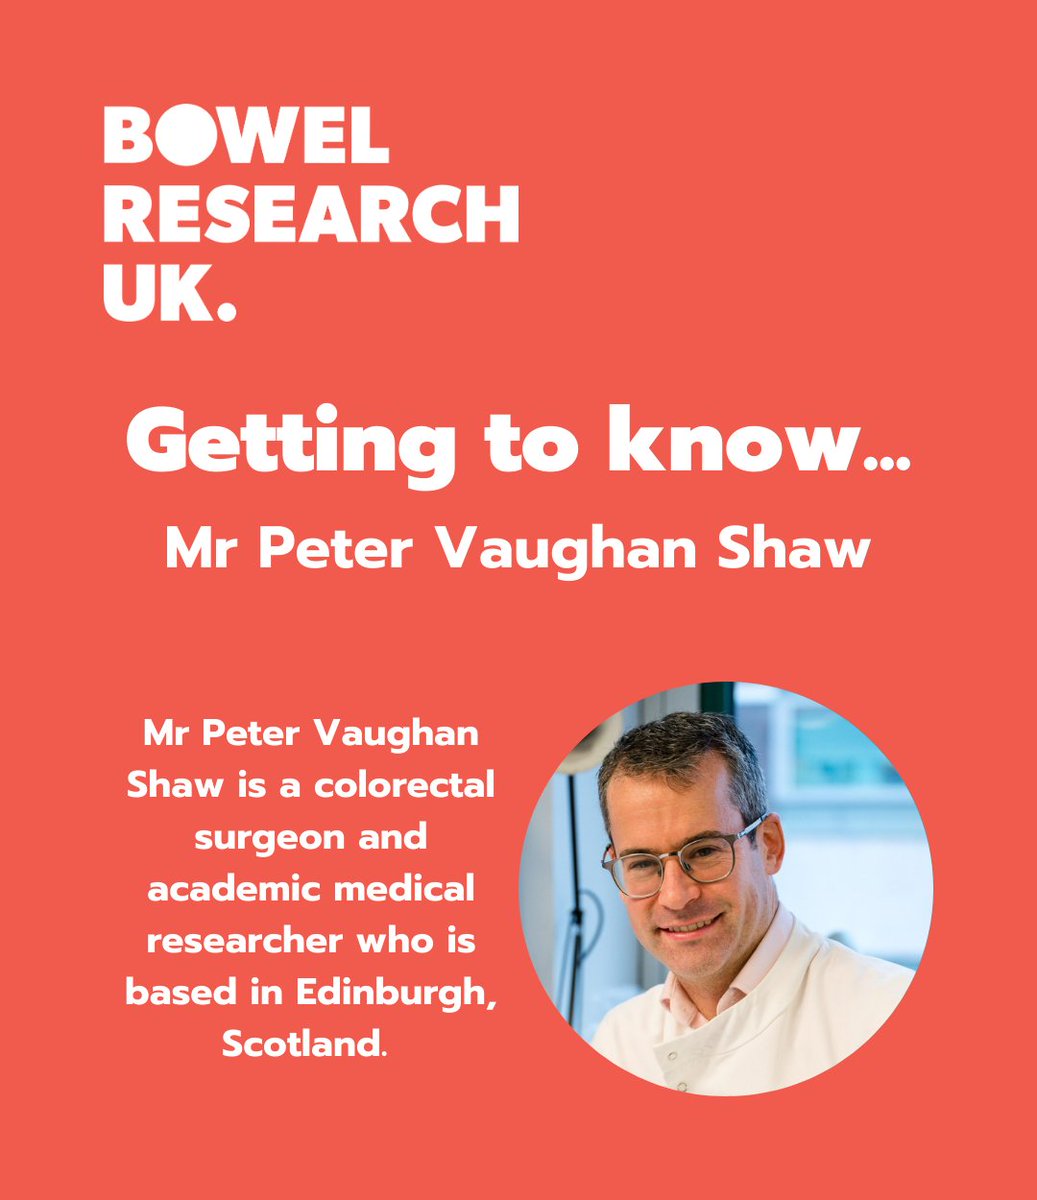 Get to know Mr Peter Vaughan Shaw: bowelresearchuk.org/about-us/getti… Since completing his PhD on Vitamin D and bowel cancer in 2018, Peter has continued to investigate the role the vitamin plays in tumour suppression and its potential to improve survival rates after surgery. #Research